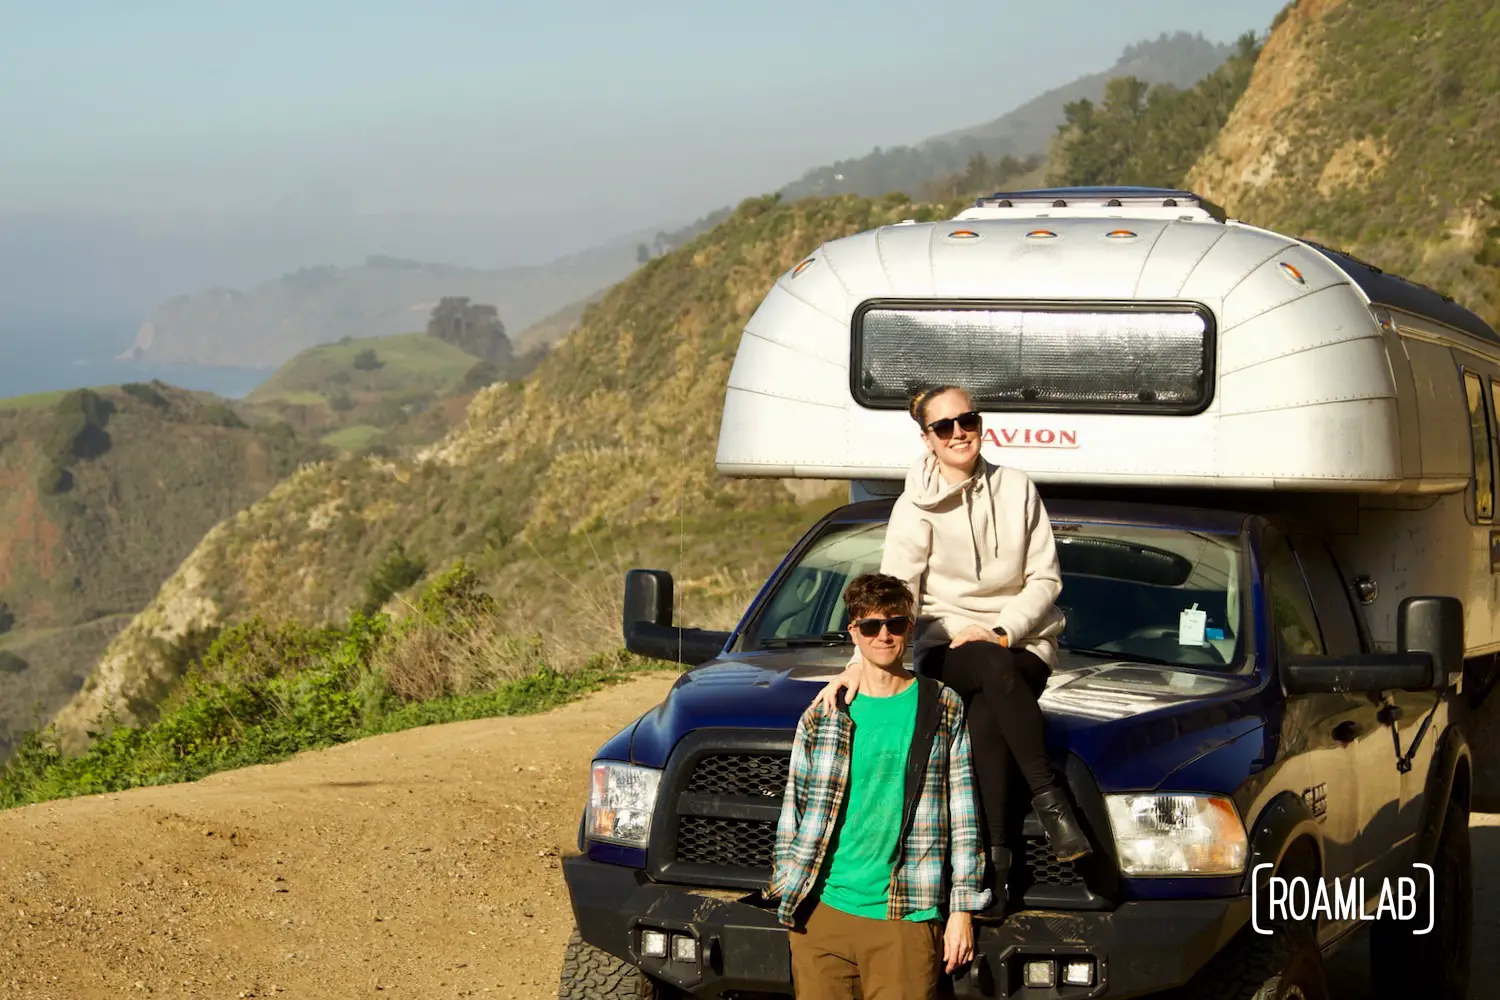 Lexi & Chris in front of their 1970 Avion C11 truck camper parked on the coast of Big Sur, California.